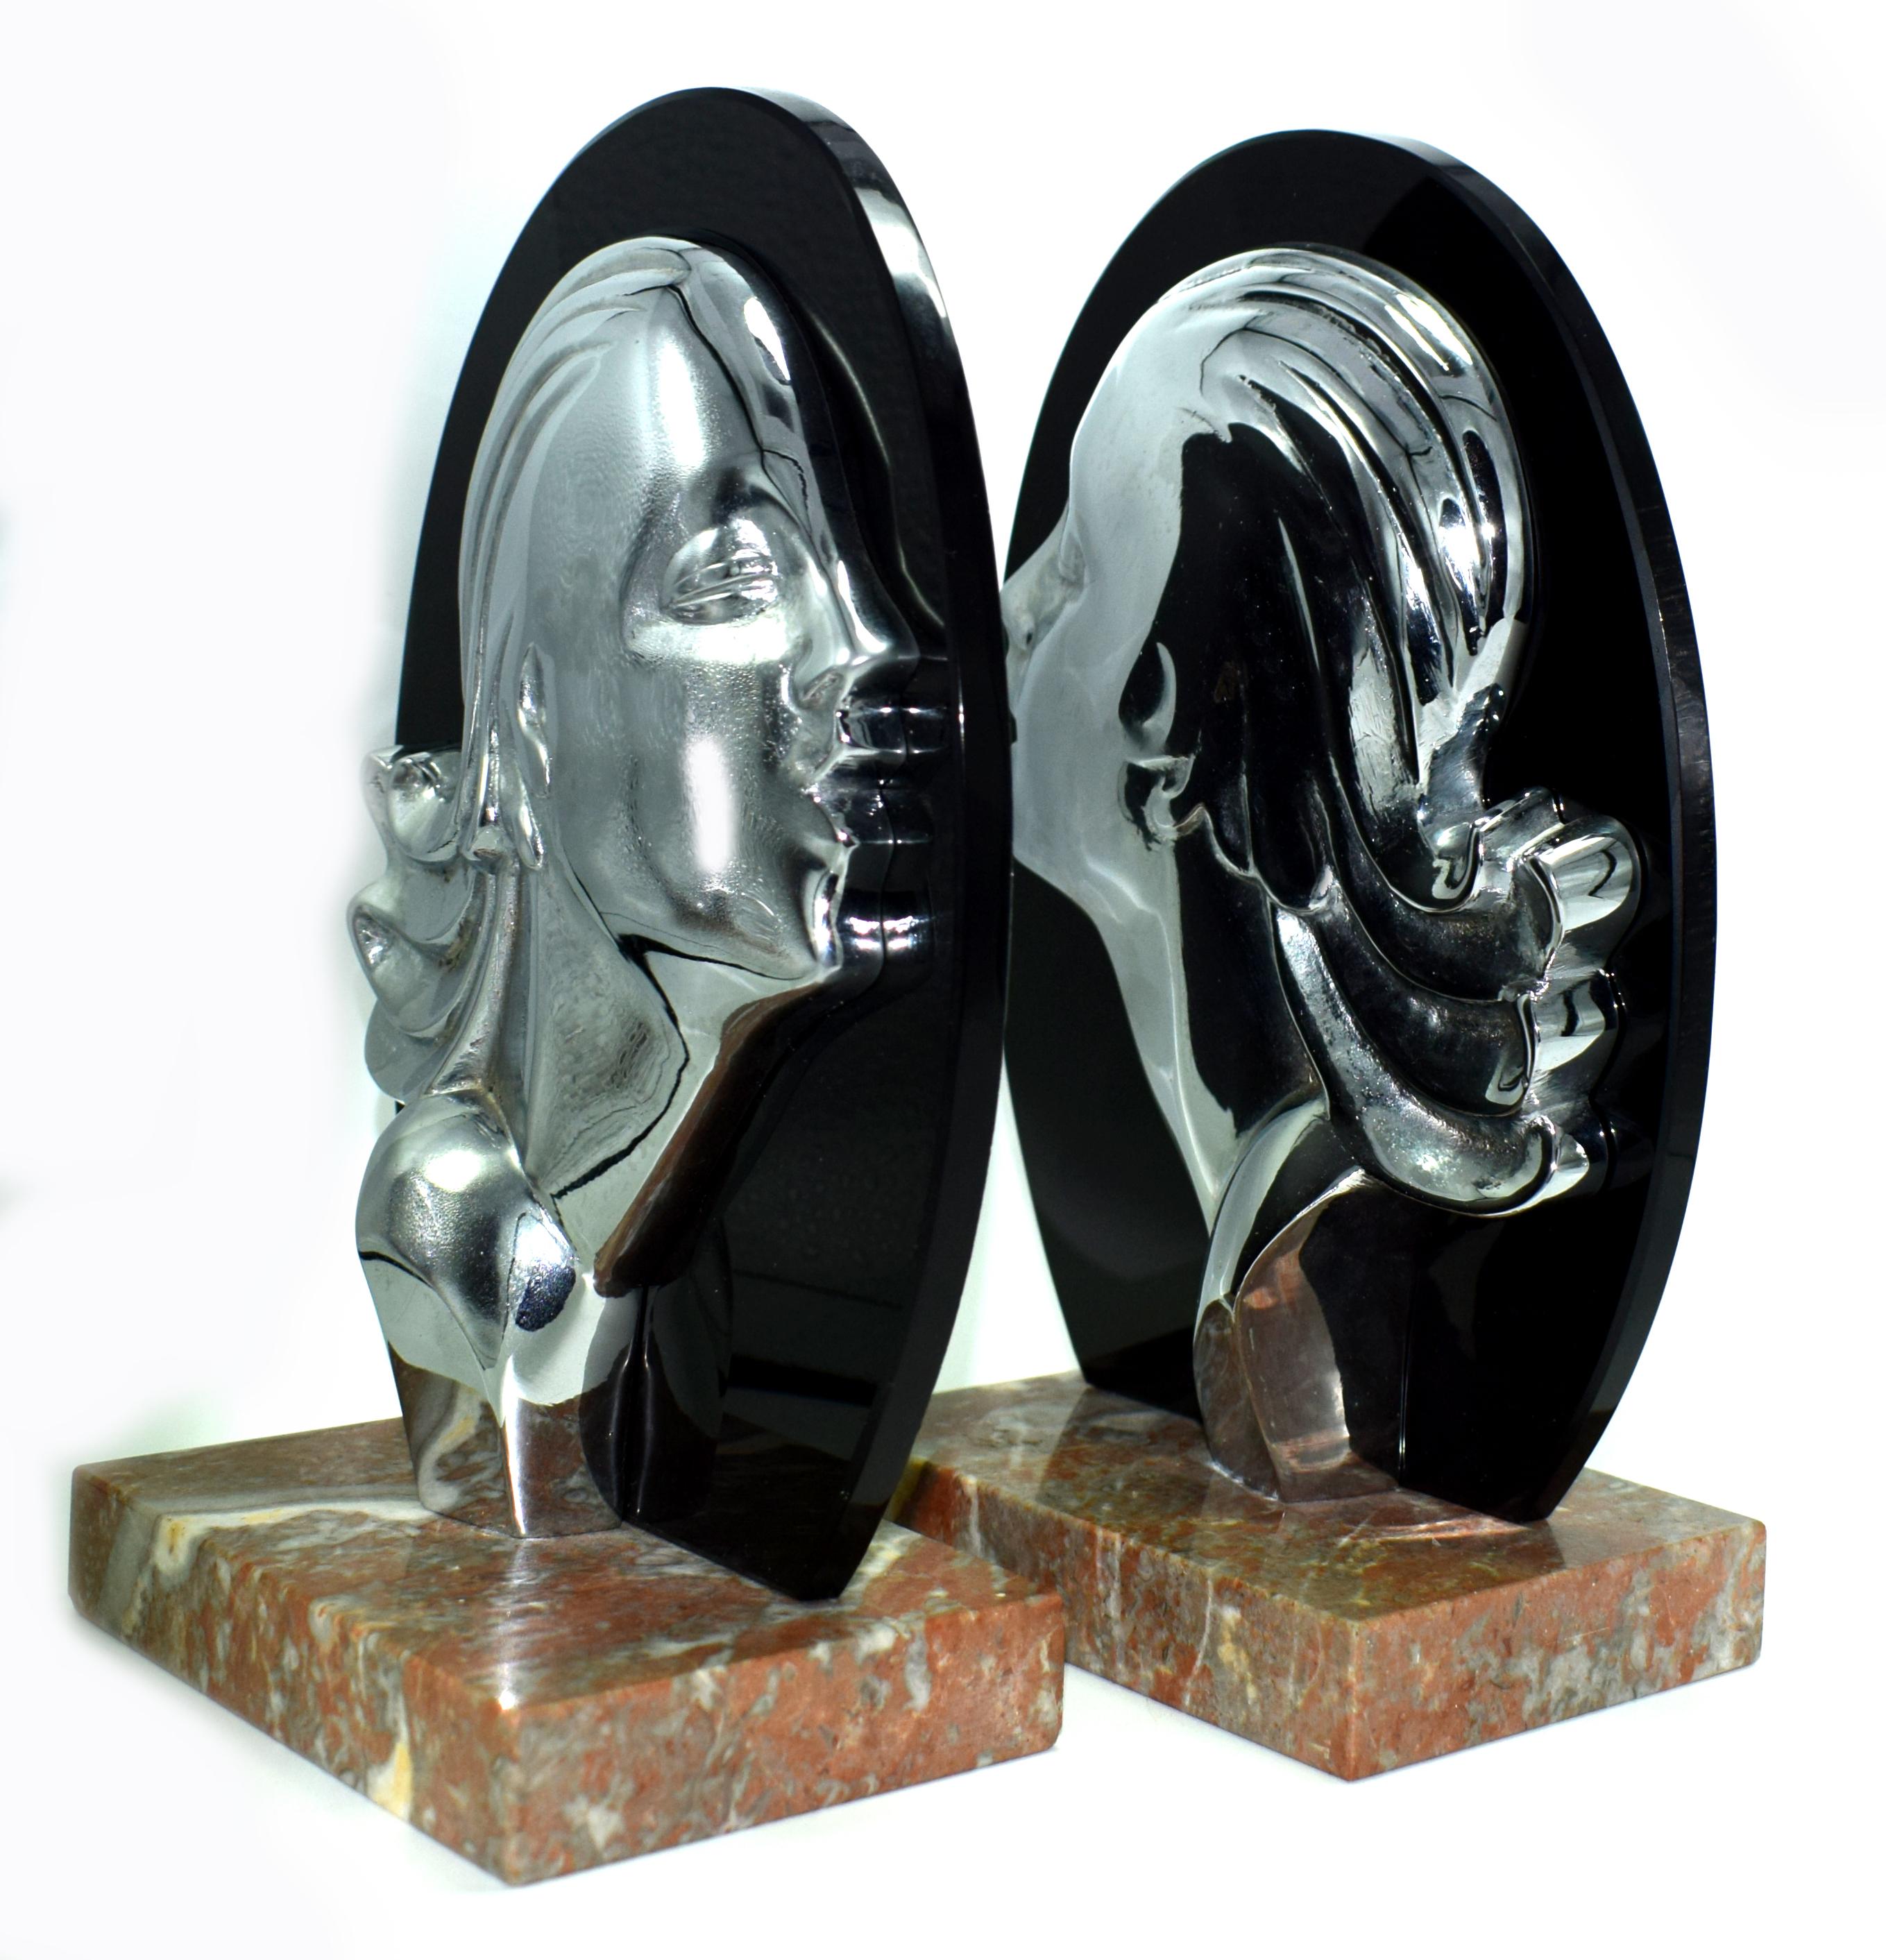 Striking pair of Art Deco bookends, very weighty, superb quality and look amazing. The backing is jet black vitrolite (compressed glass) which acts as the back drop to a chrome stylised Art Deco ladies profile. The base is solid marble and as such